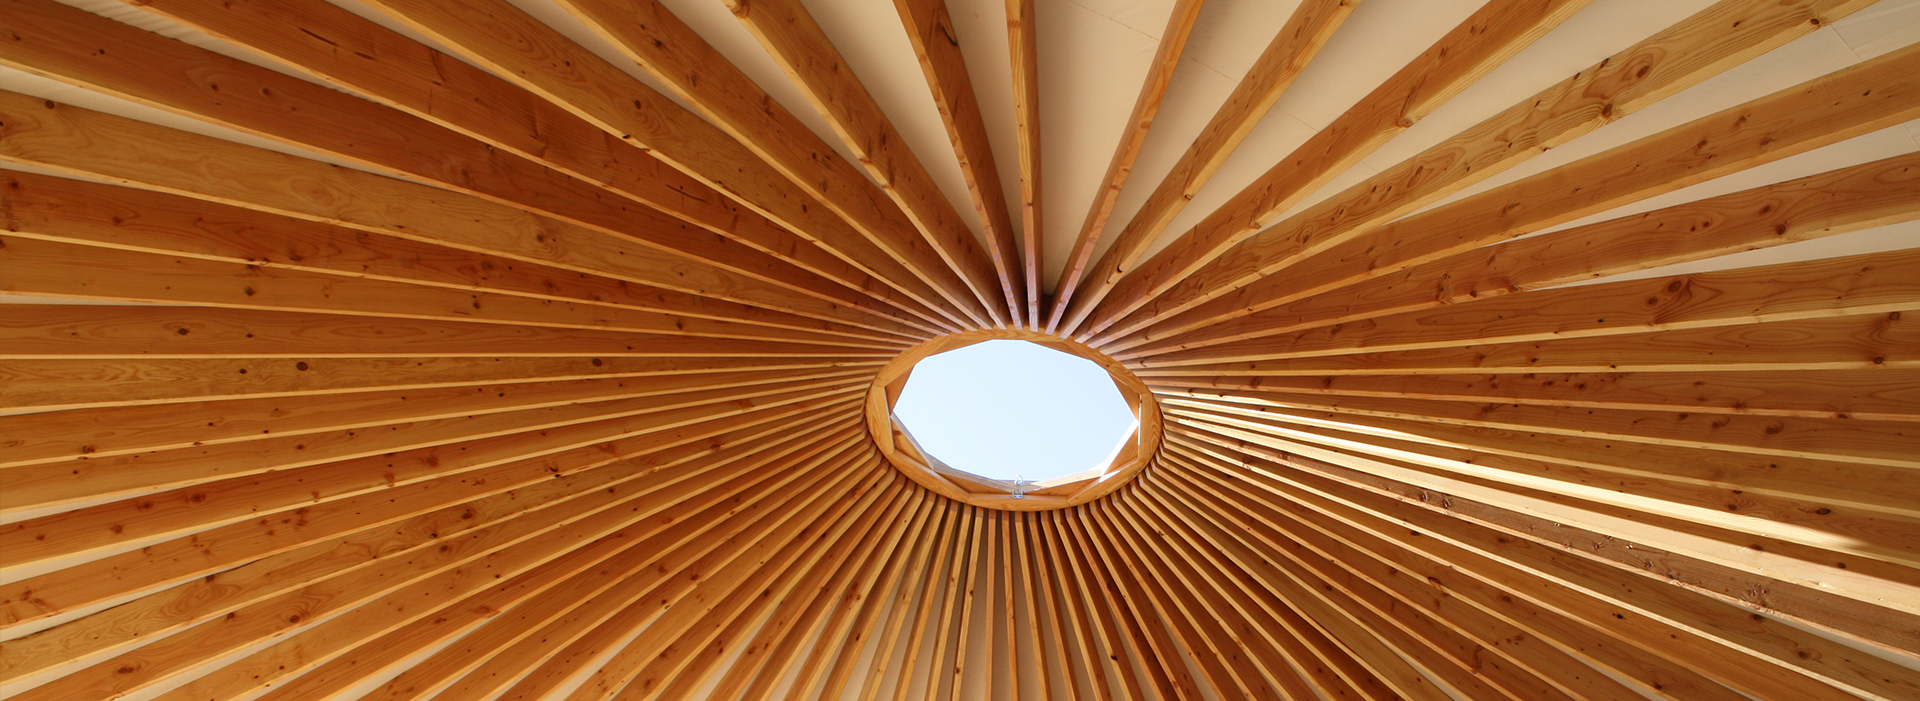 big sky yurt rafters and center ring